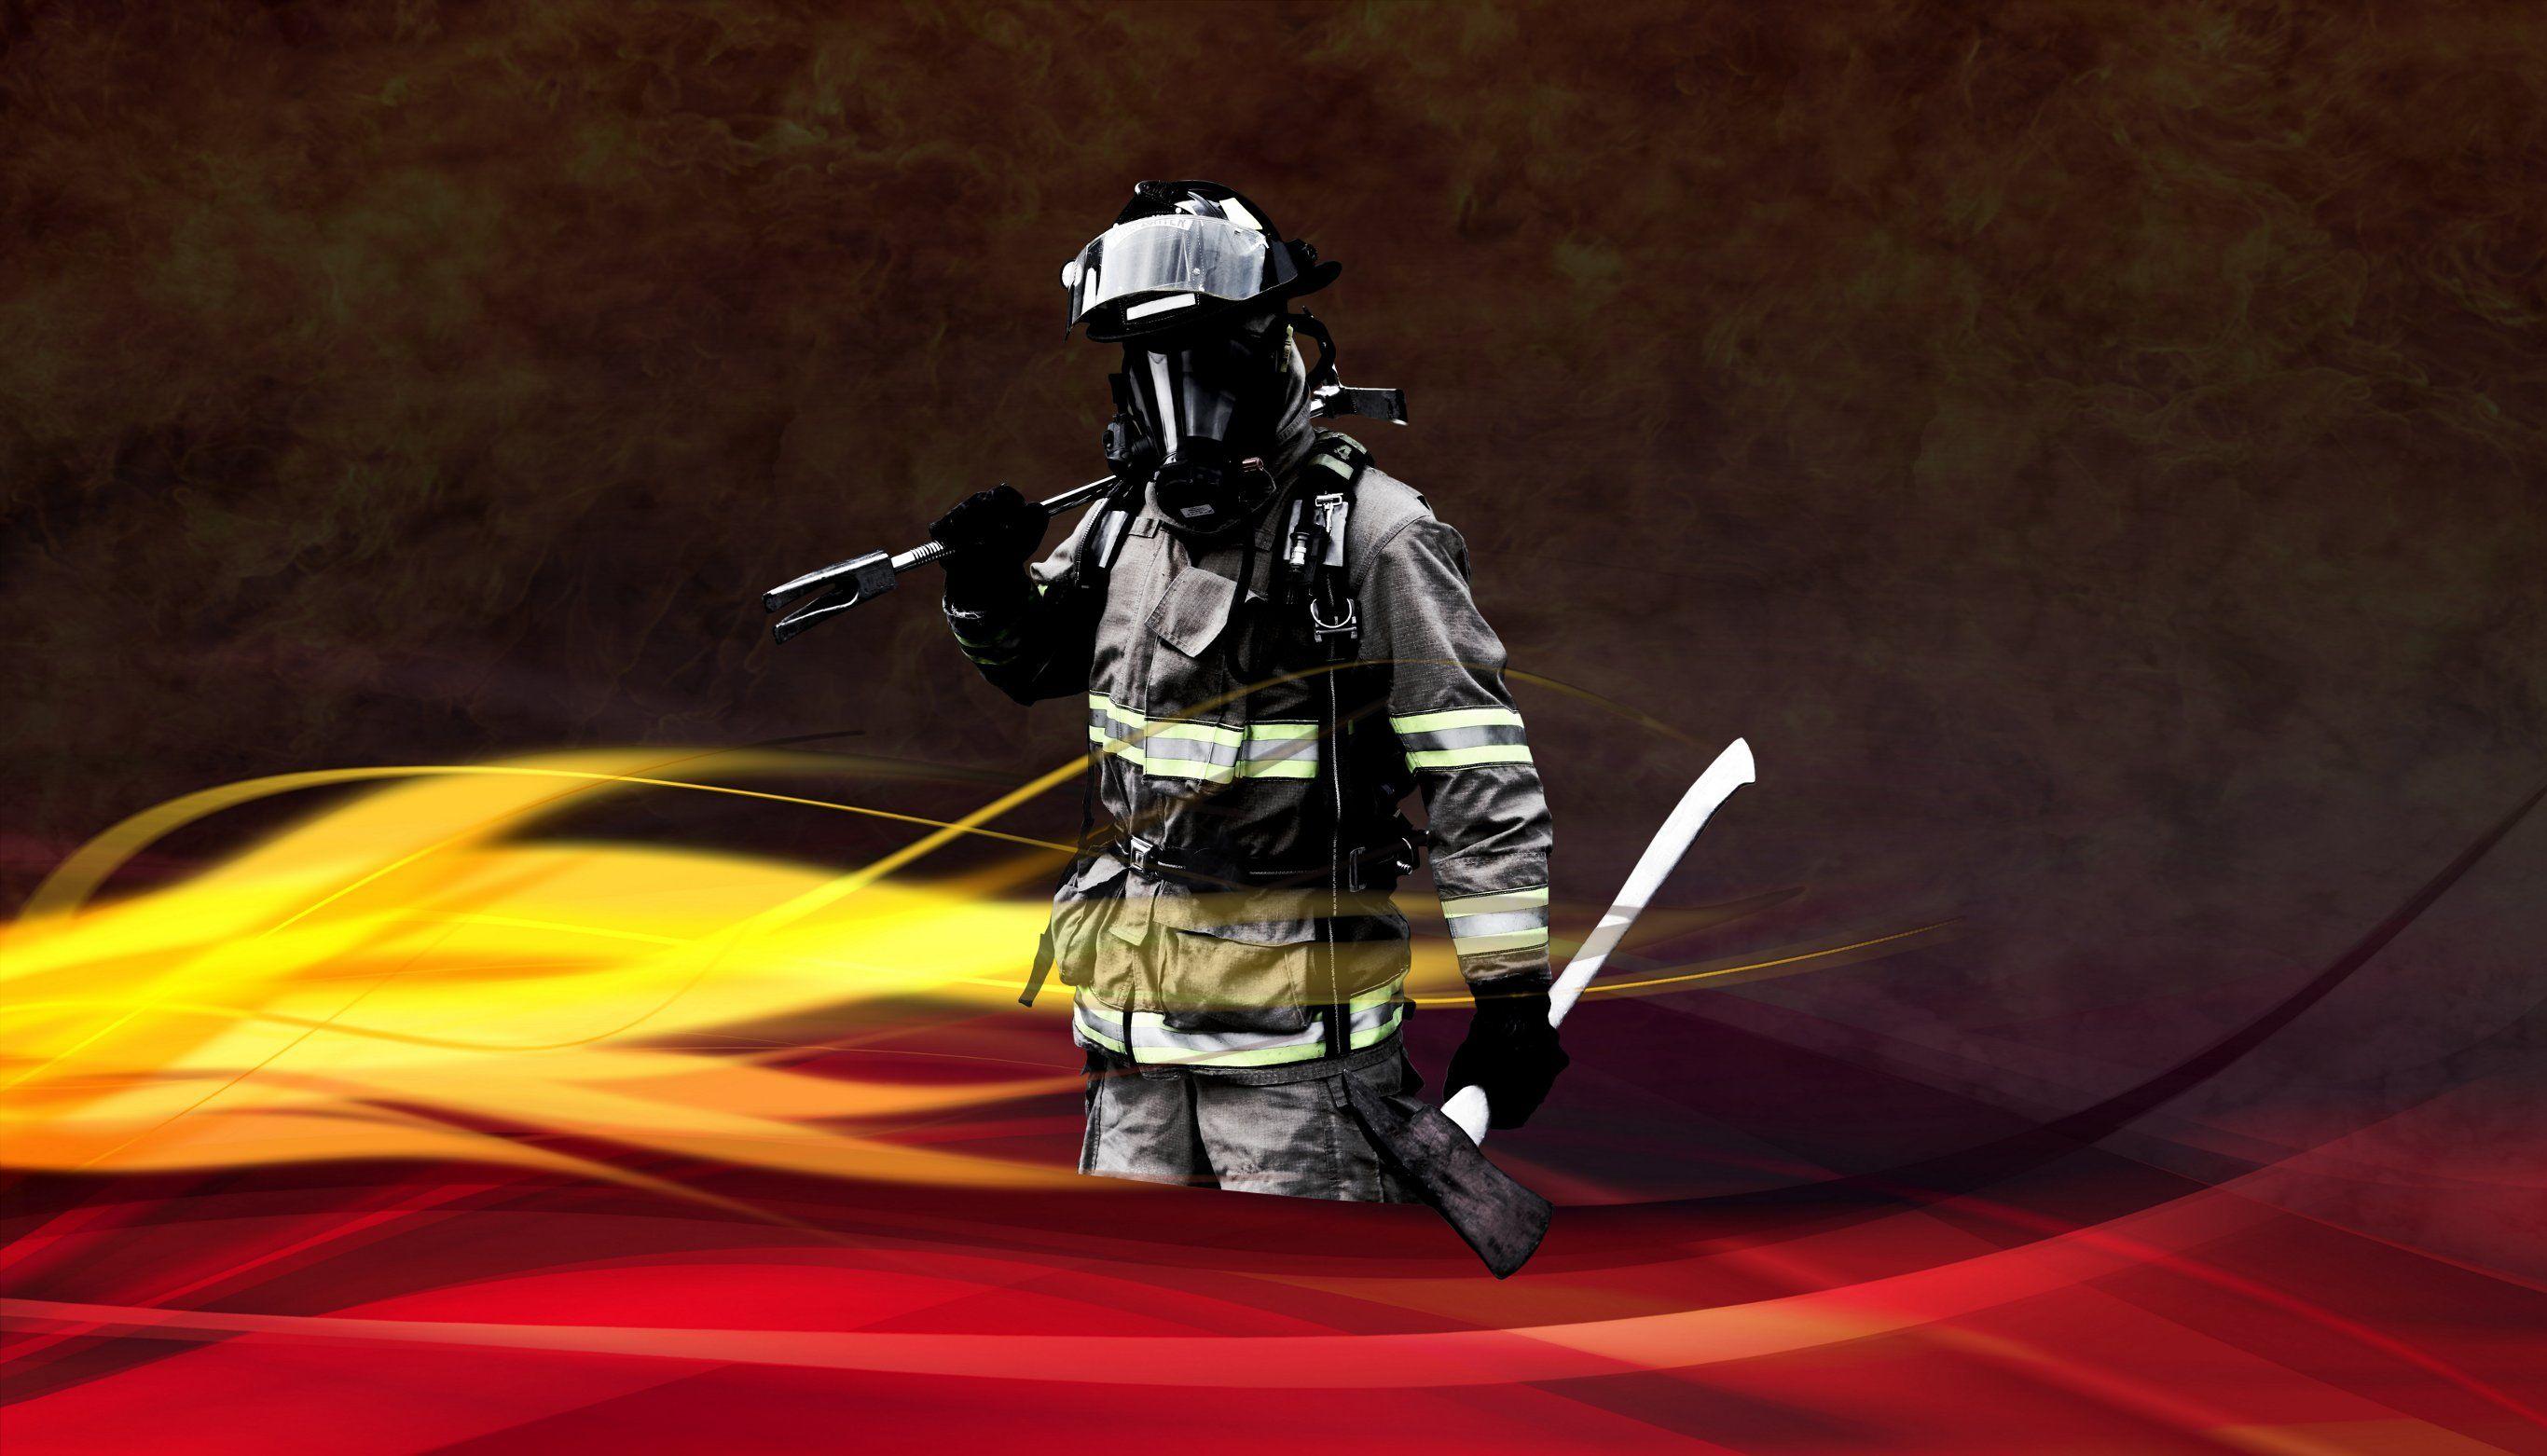 Wallpaper.wiki Download Fire Department Image PIC WPB004847